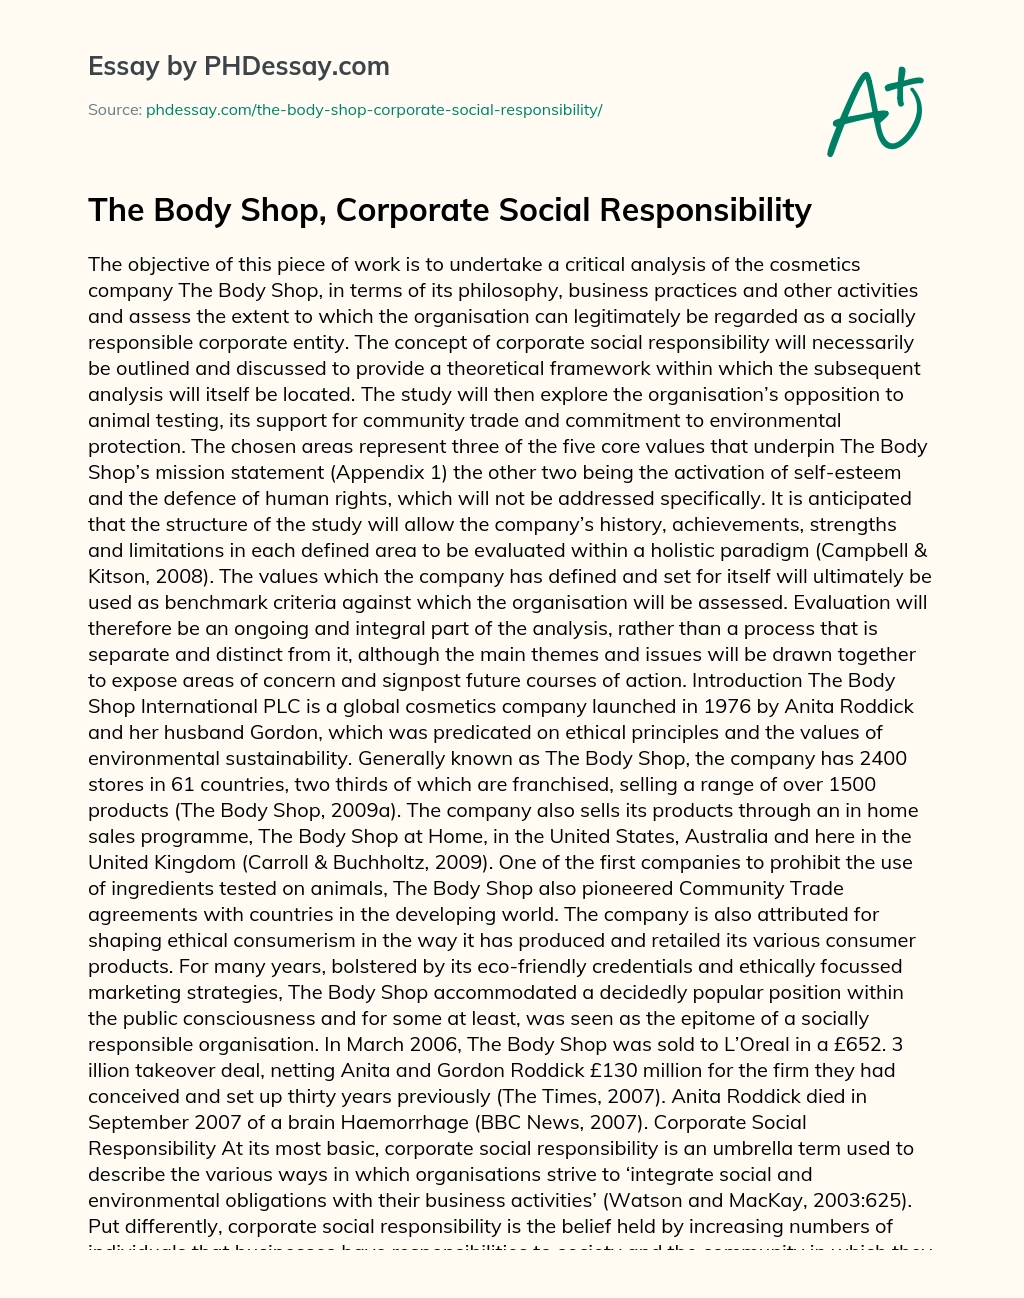 The Body Shop, Corporate Social Responsibility essay